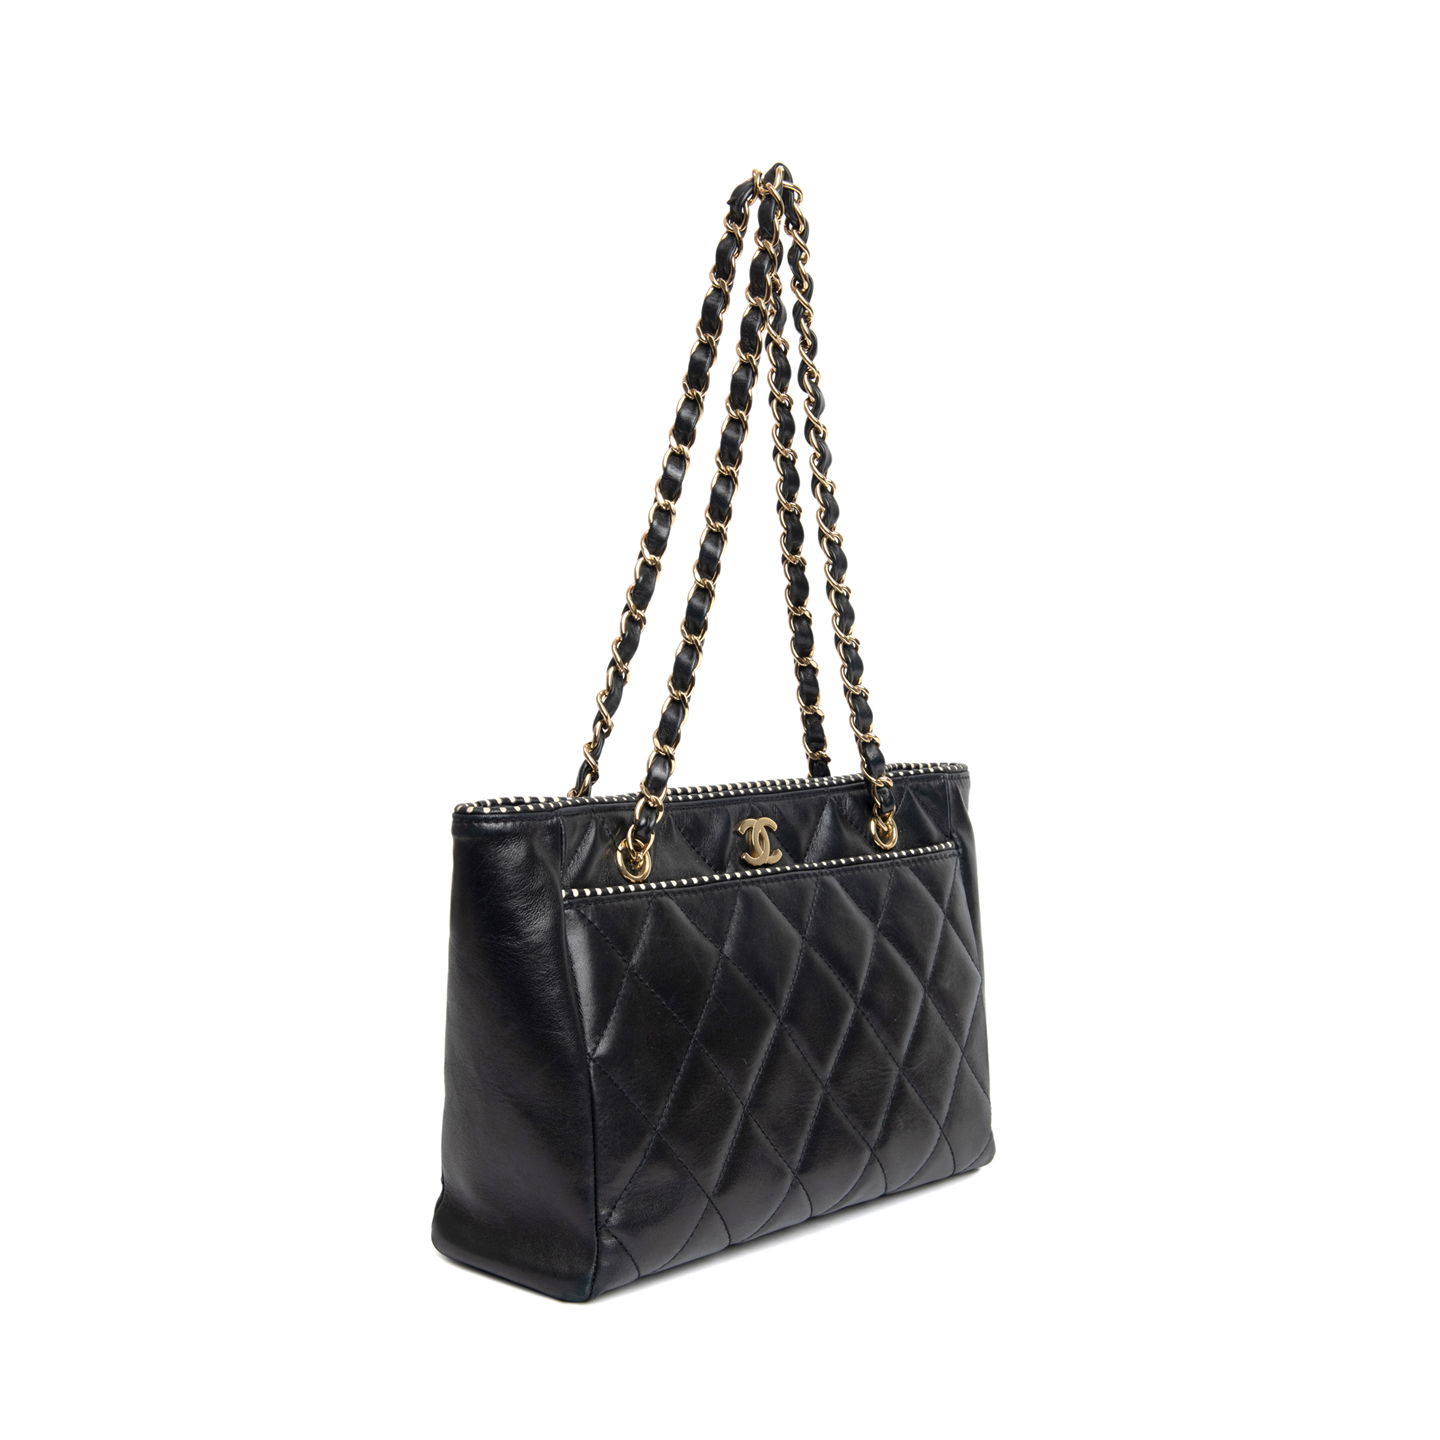 Chanel Black Quilted Lambskin Leather Shoulder Bag - LabelCentric